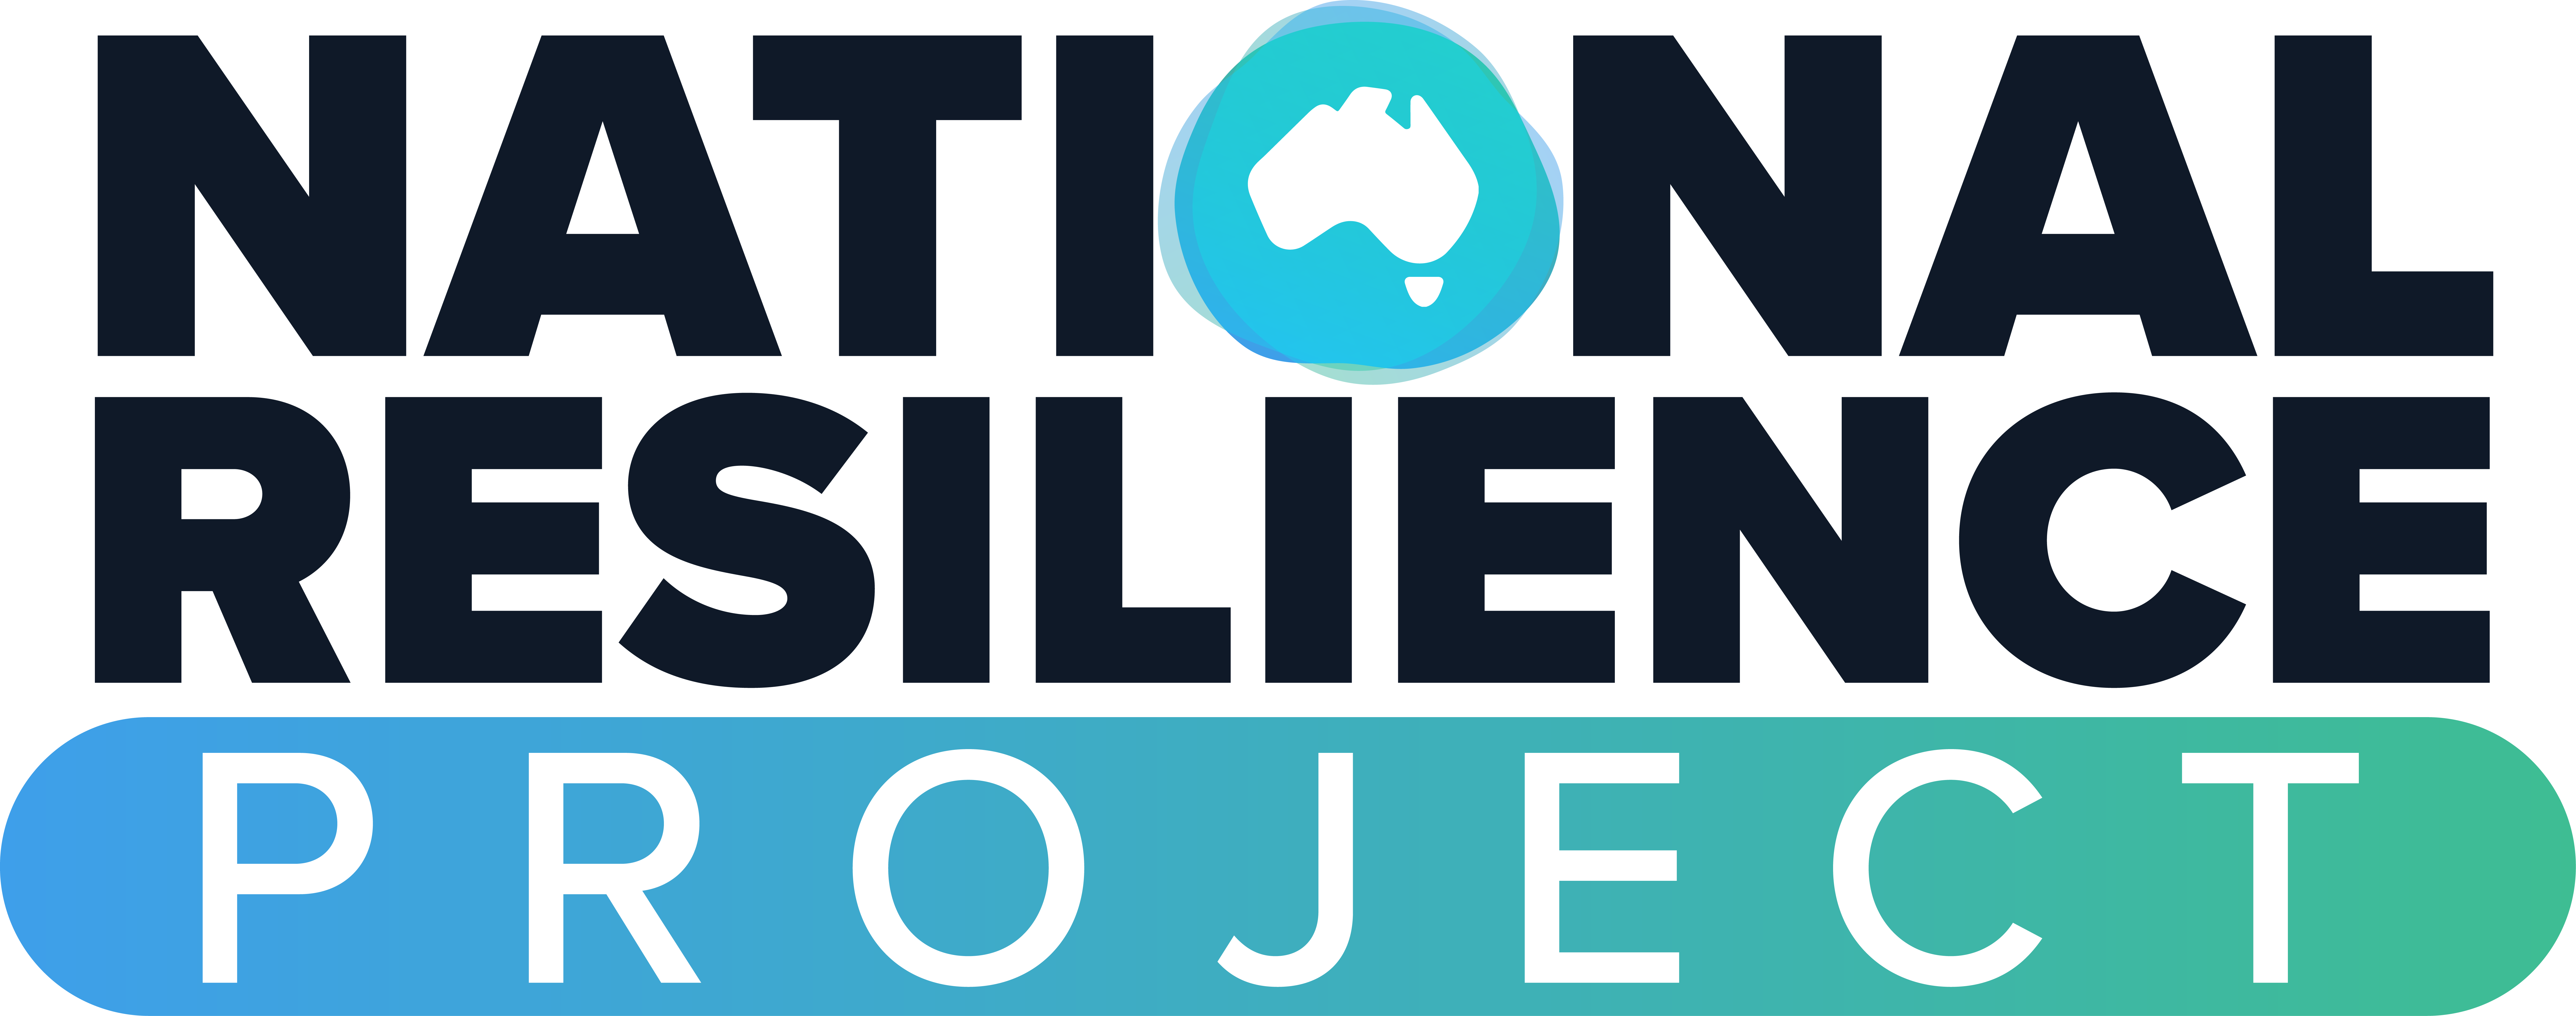 National Resilience Project Australia logo